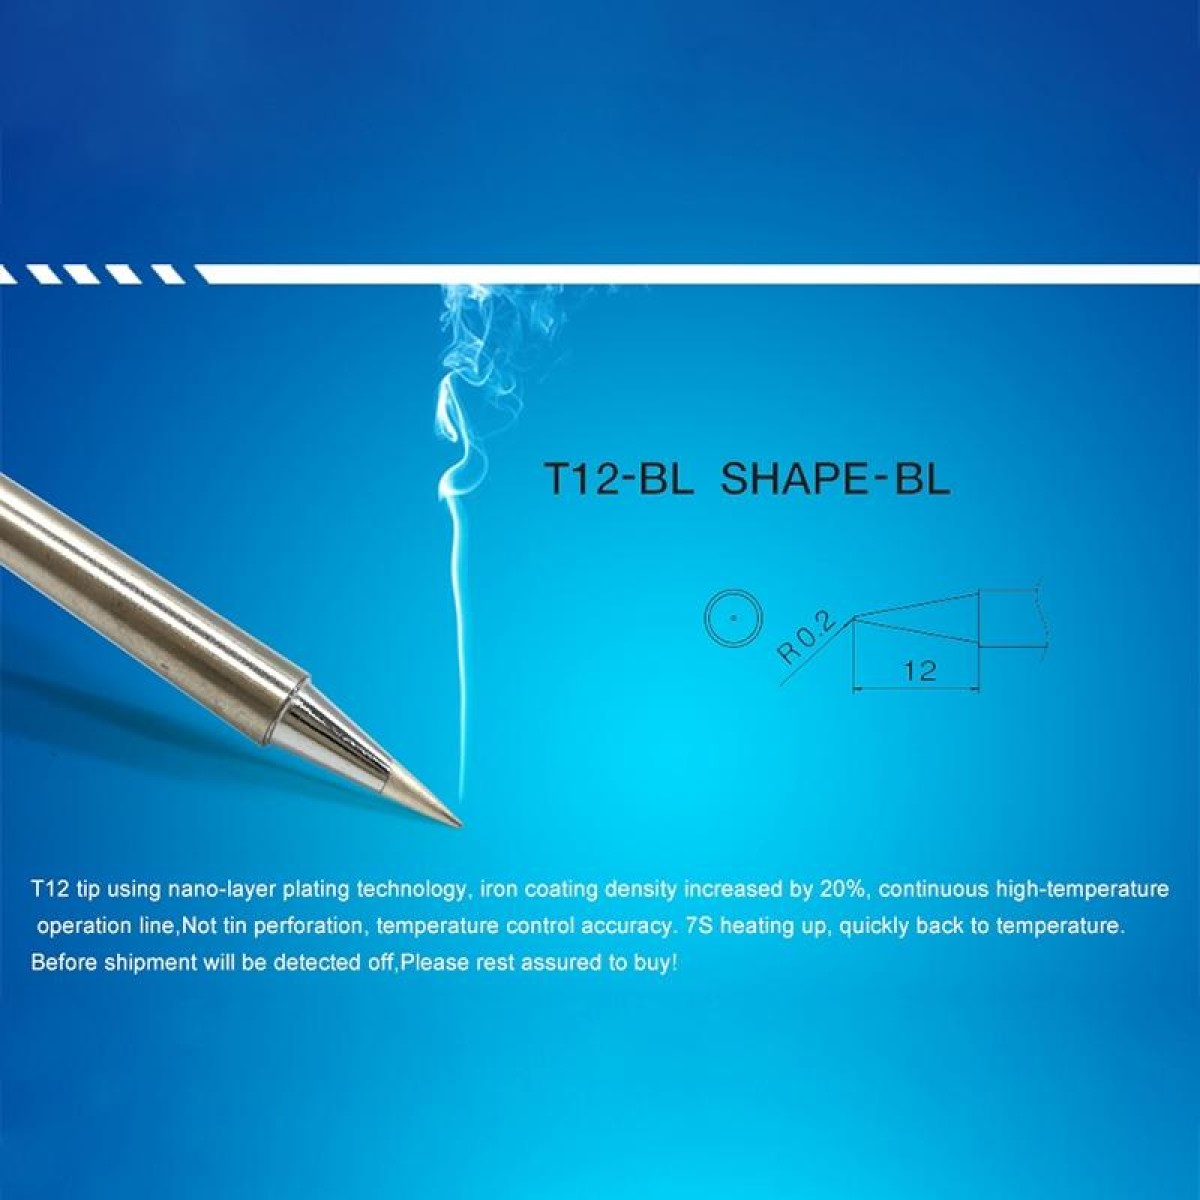 QUICKO T12-BL Lead-free Soldering Iron Tip